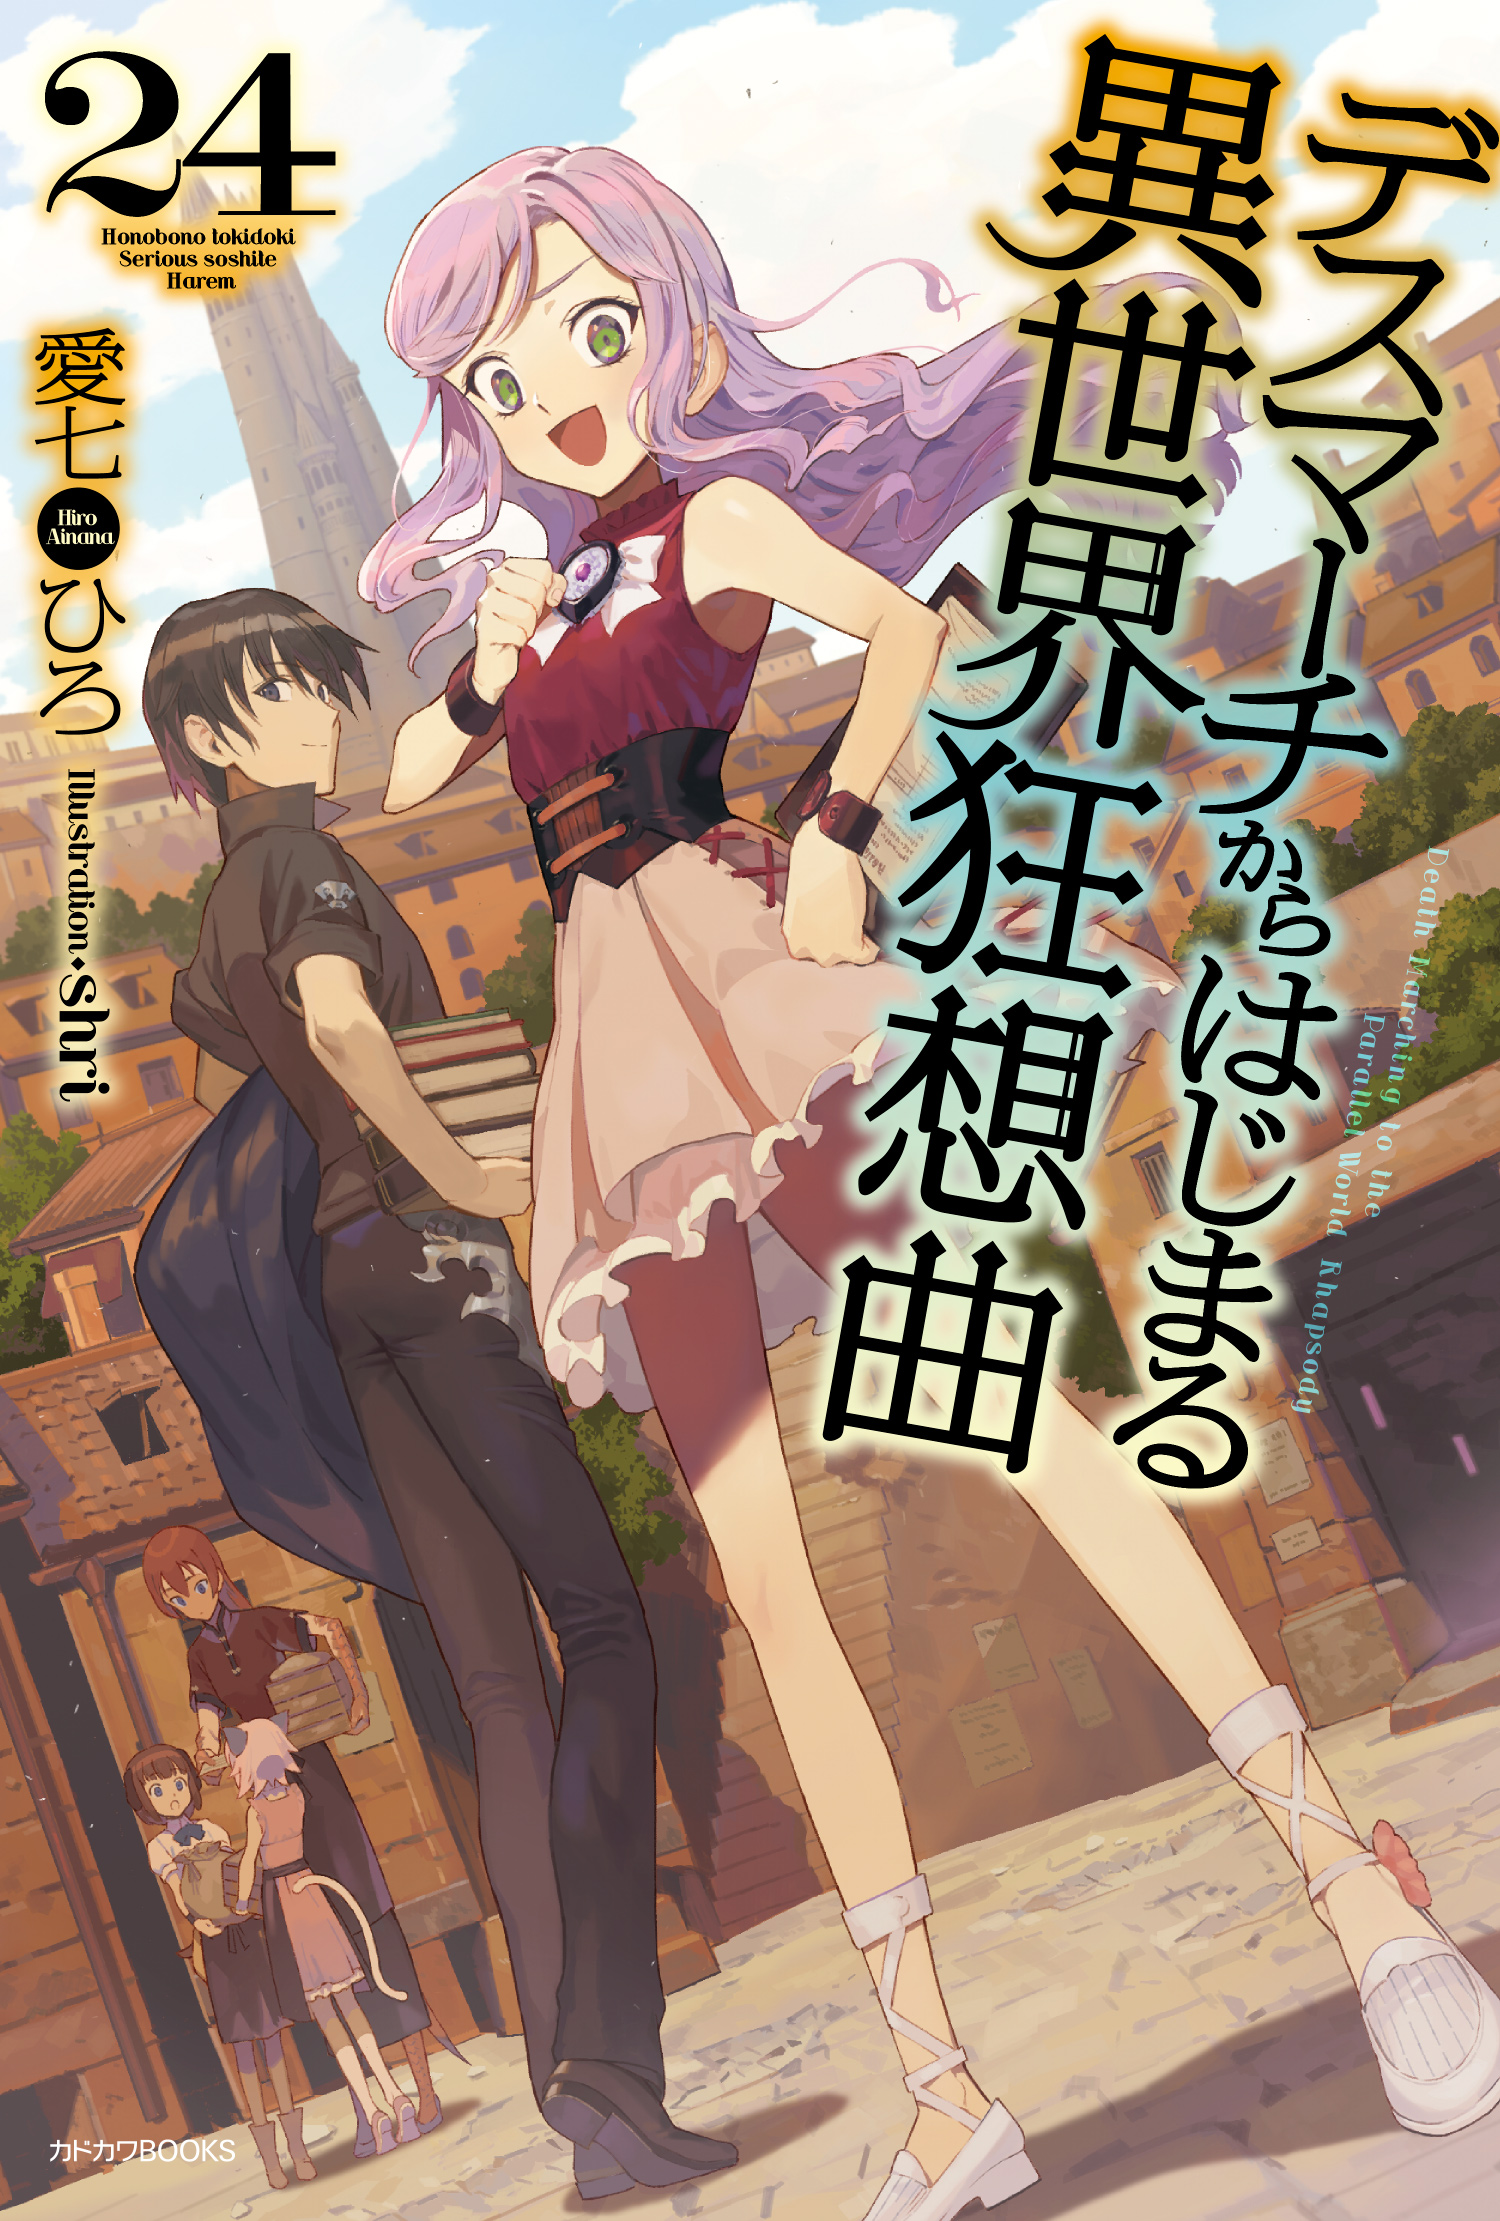 Light Novel Volume 24, Death March to the Parallel World Rhapsody Wiki